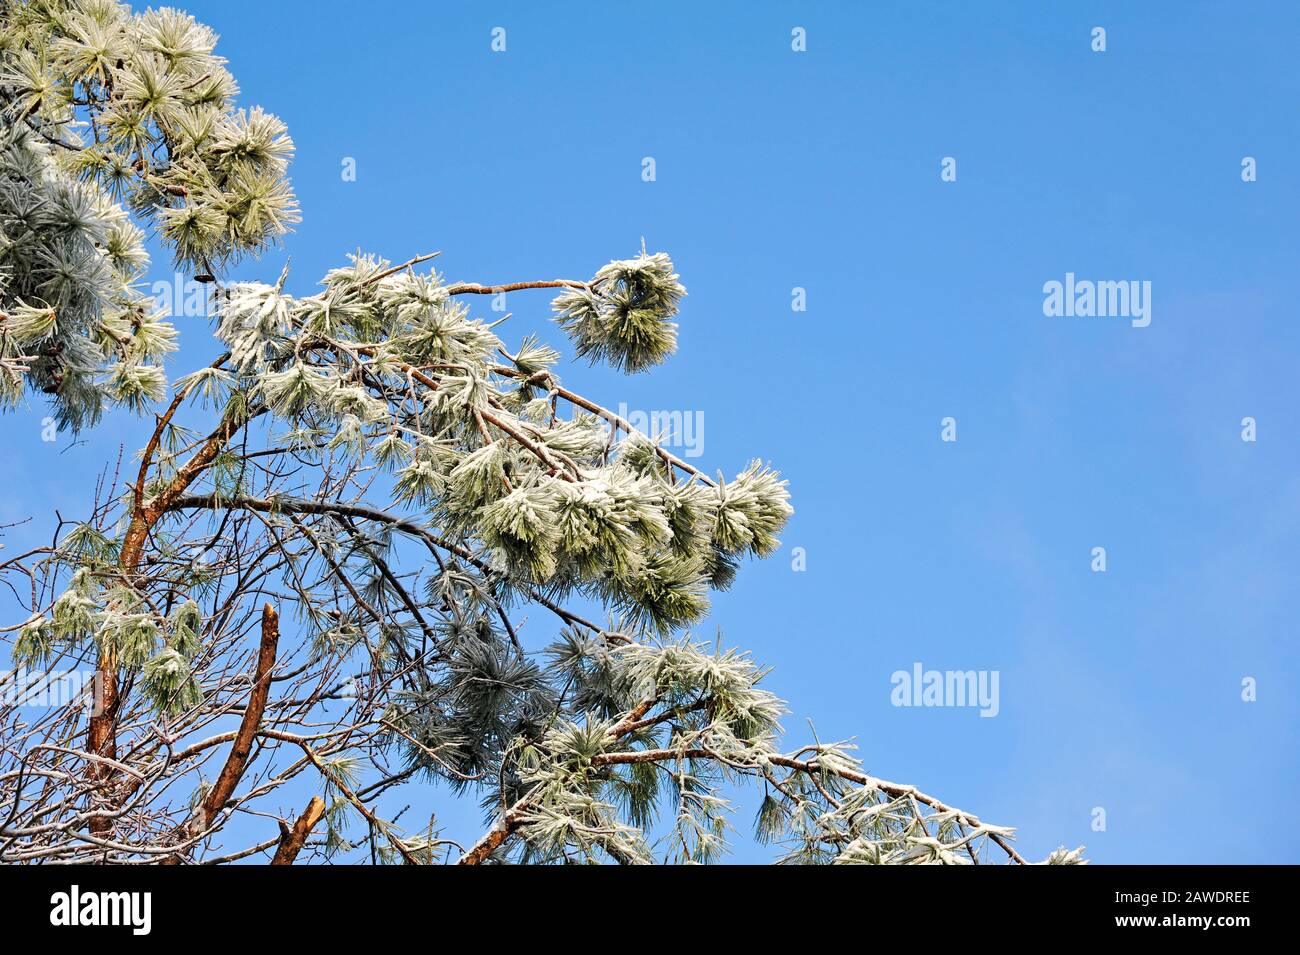 Top of Ice Covered Pine Trees in Winter Storm Stockfoto